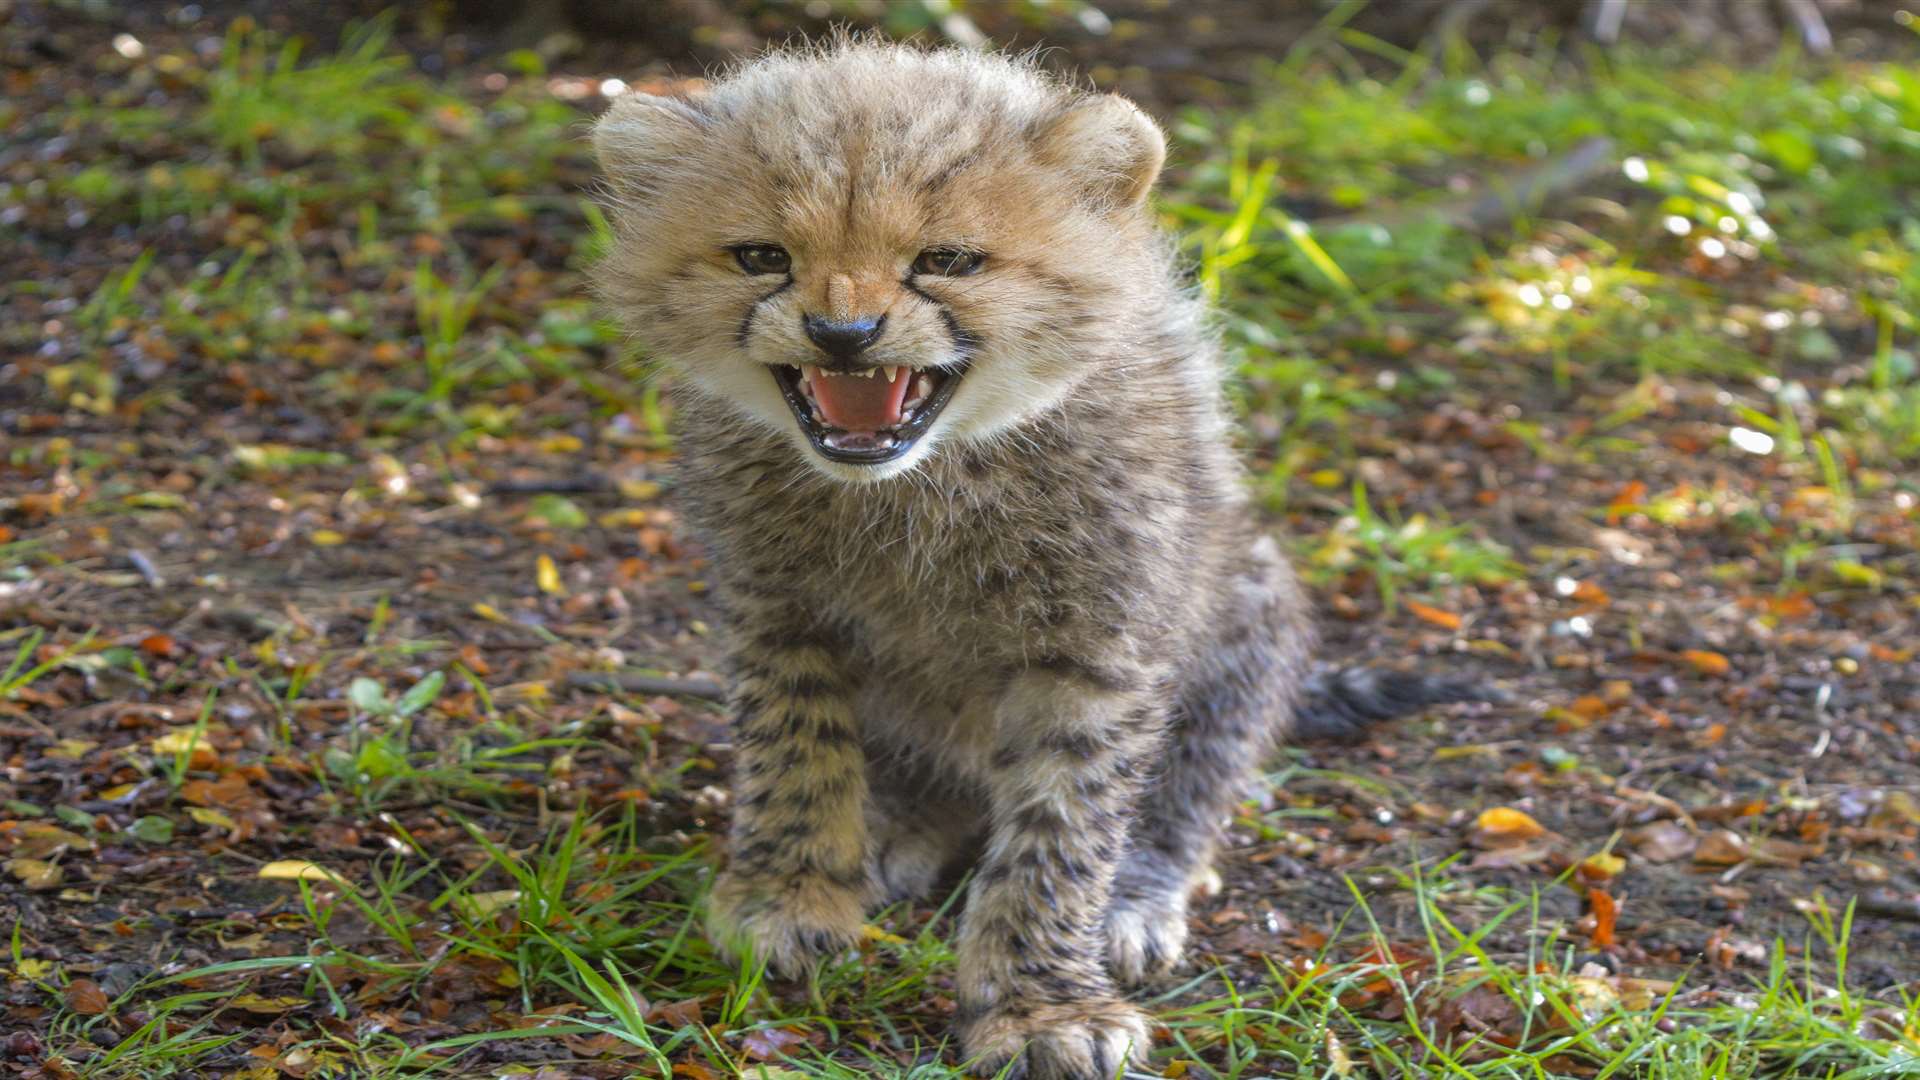 One of the new cheetah cubs at Port Lympne exercises his lungs